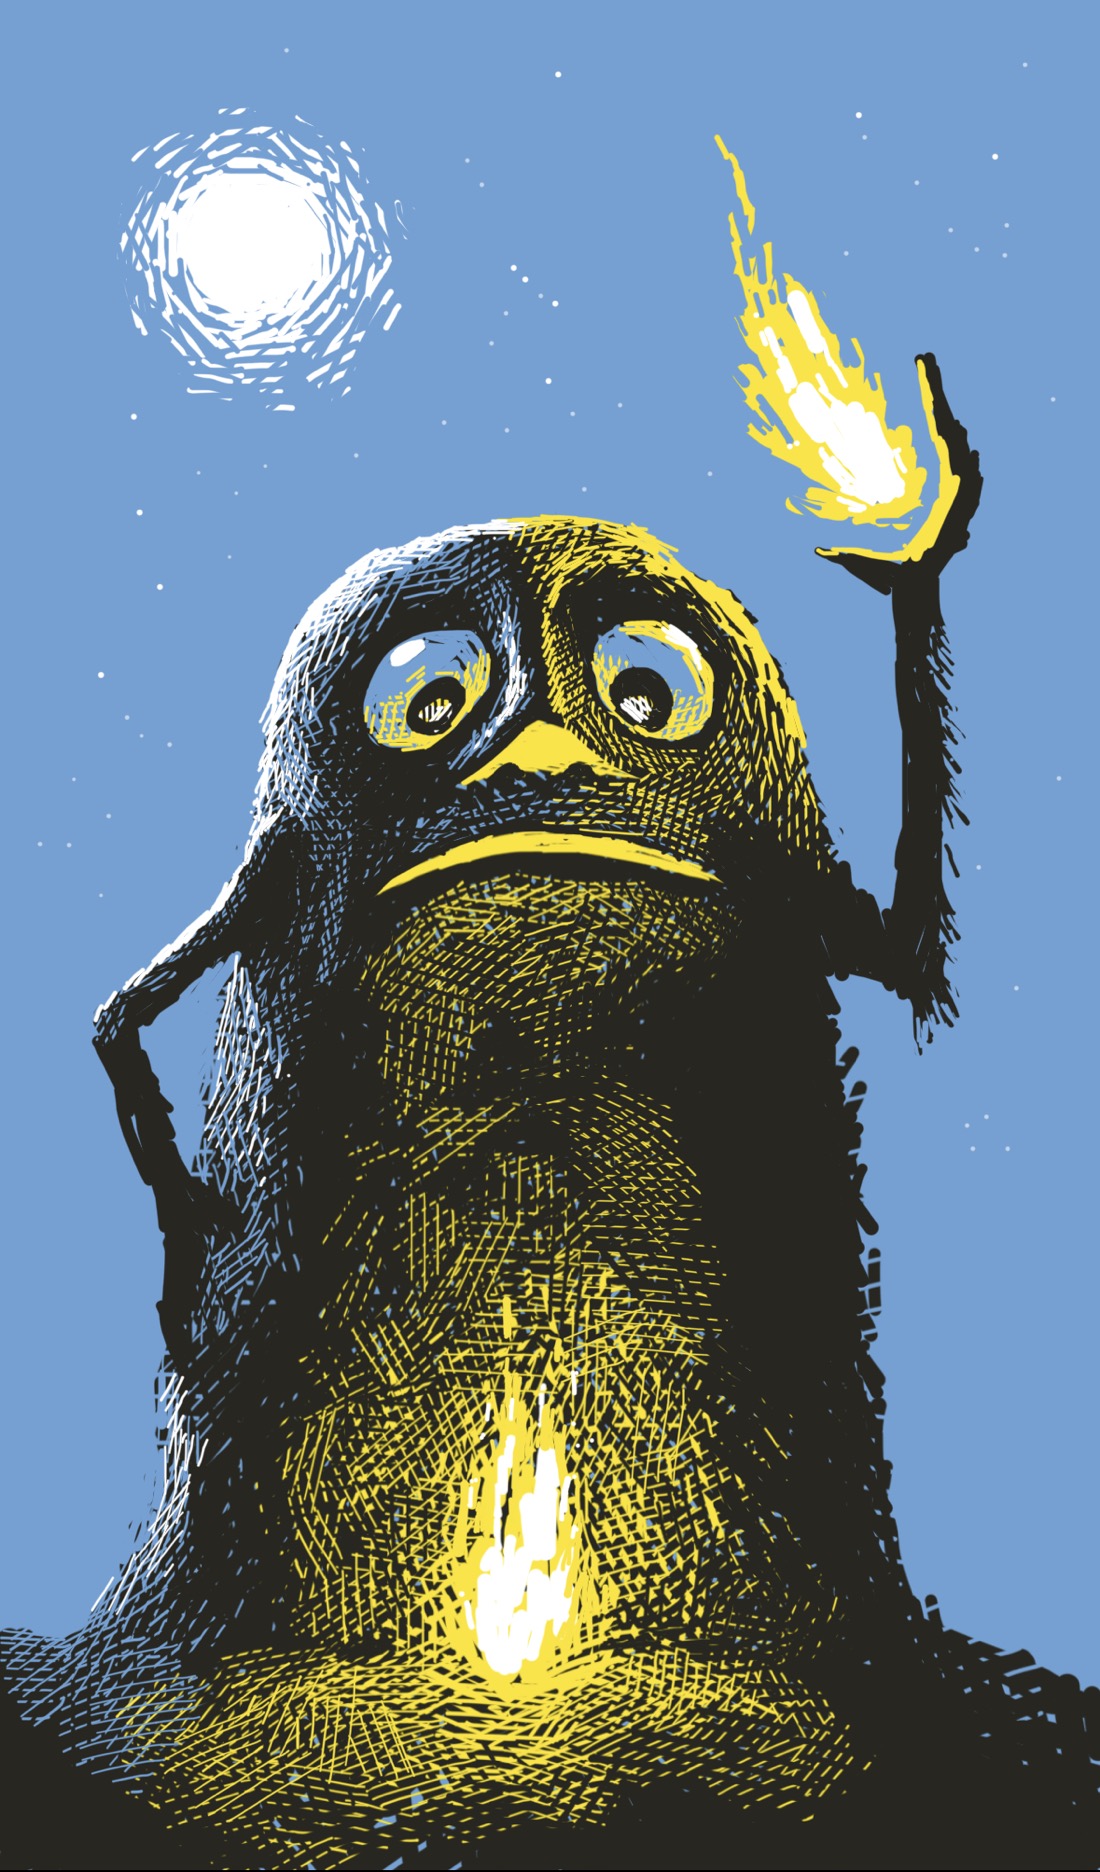 A roughly bullet-shaped creature—cylindrical body, domed head, two spindly arms—stands on the ground at night in front of a small fire. The creature's left arm is up, fingers apart, conjuring up a flame. A full moon and starry sky are visible over the creature's right shoulder. The creature's face is eerily lit from below by the small fire in front of it.